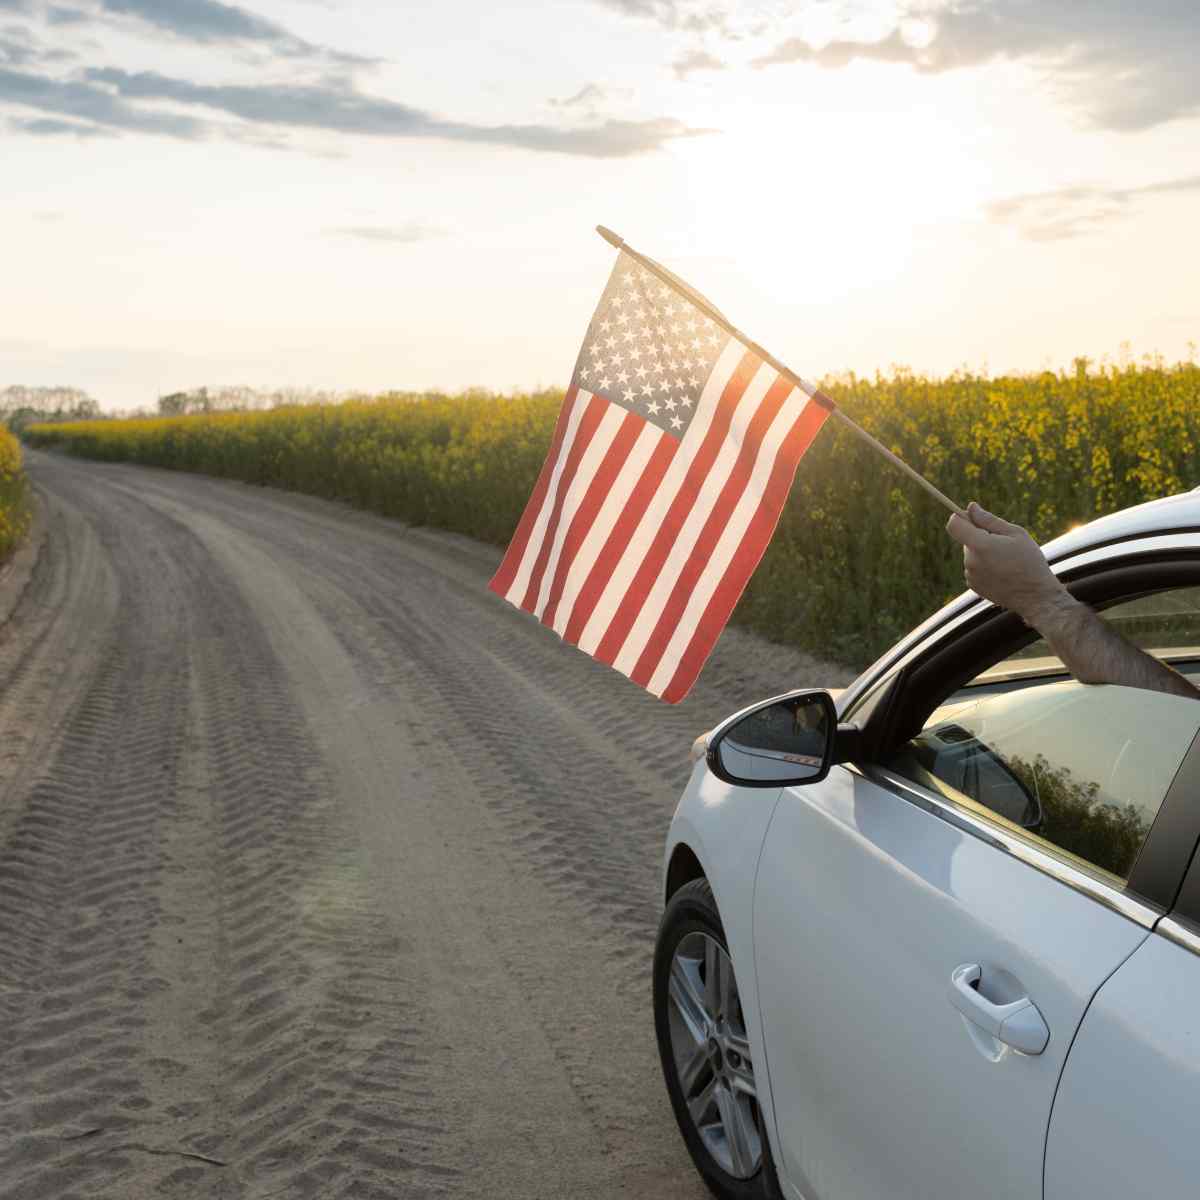 A driver holds an American flag out their car window while driving a white car on a country road.